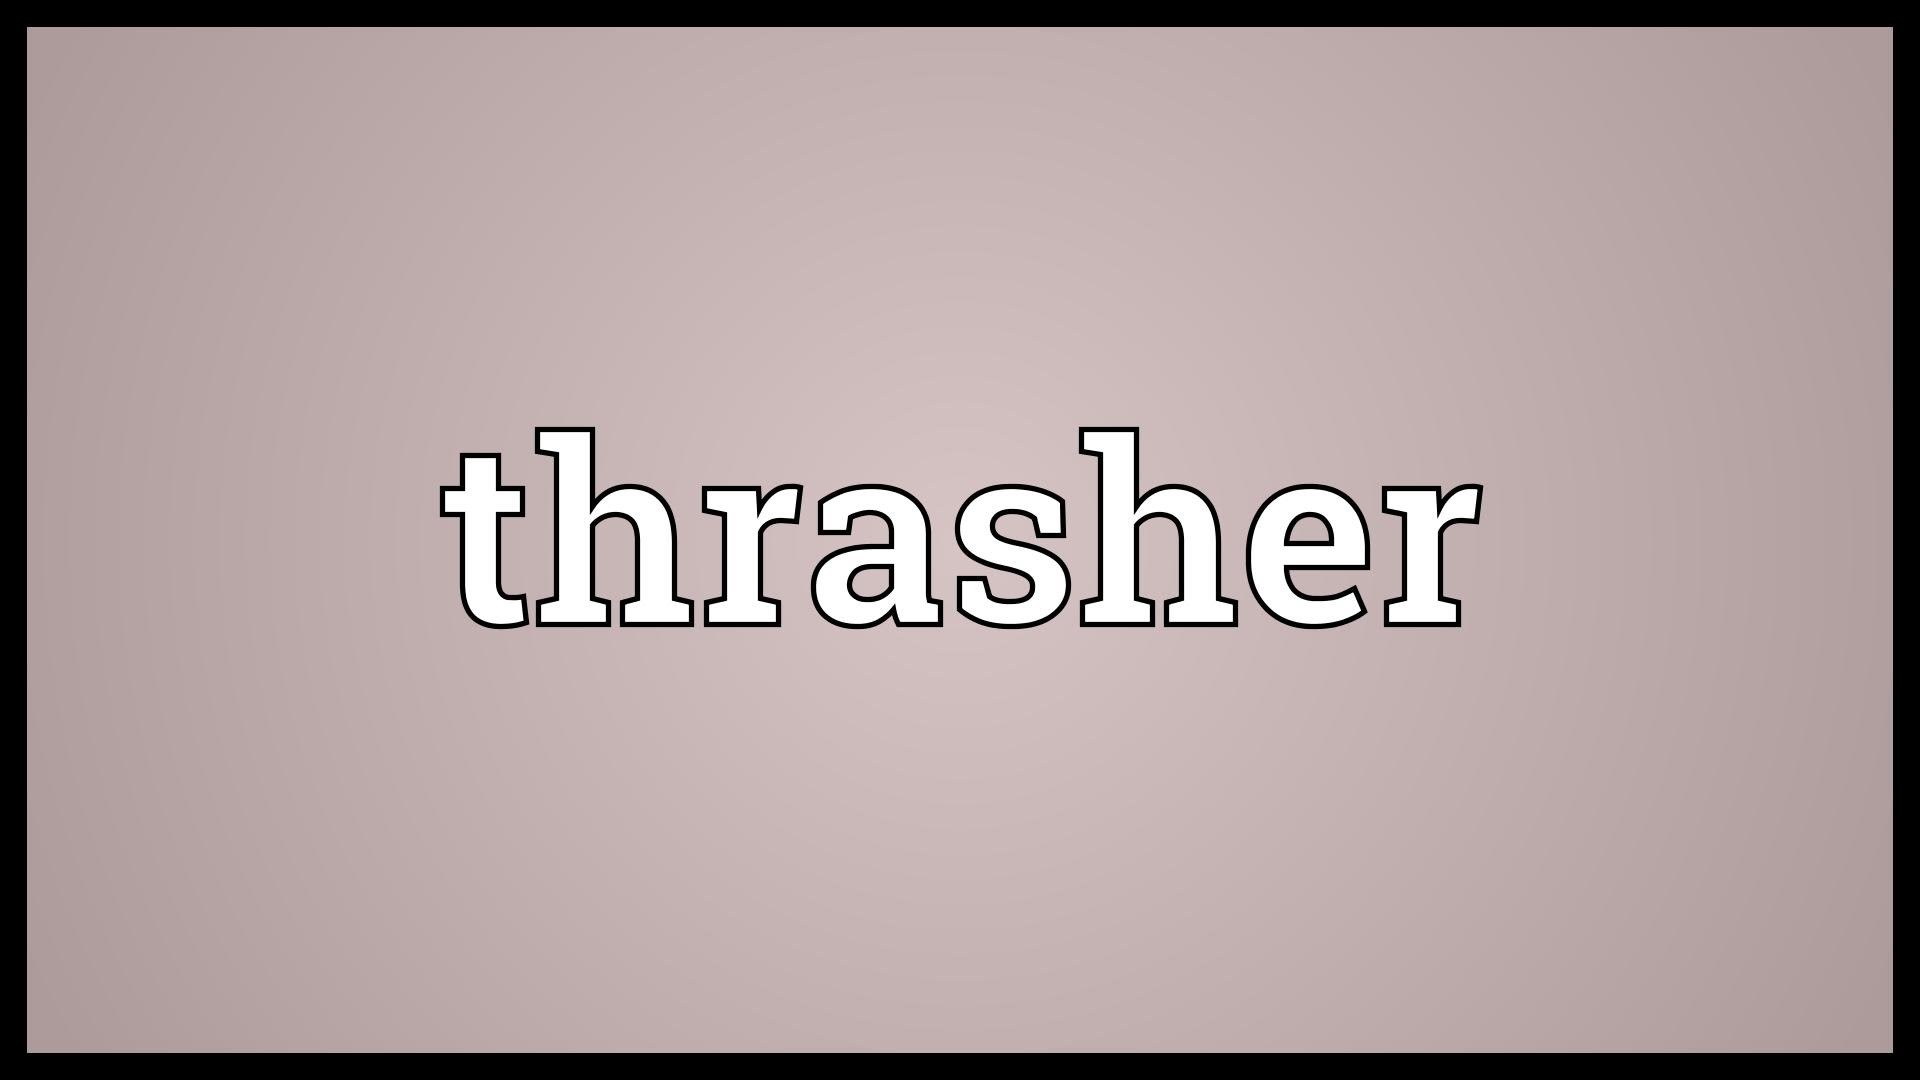 Thrasher Meaning